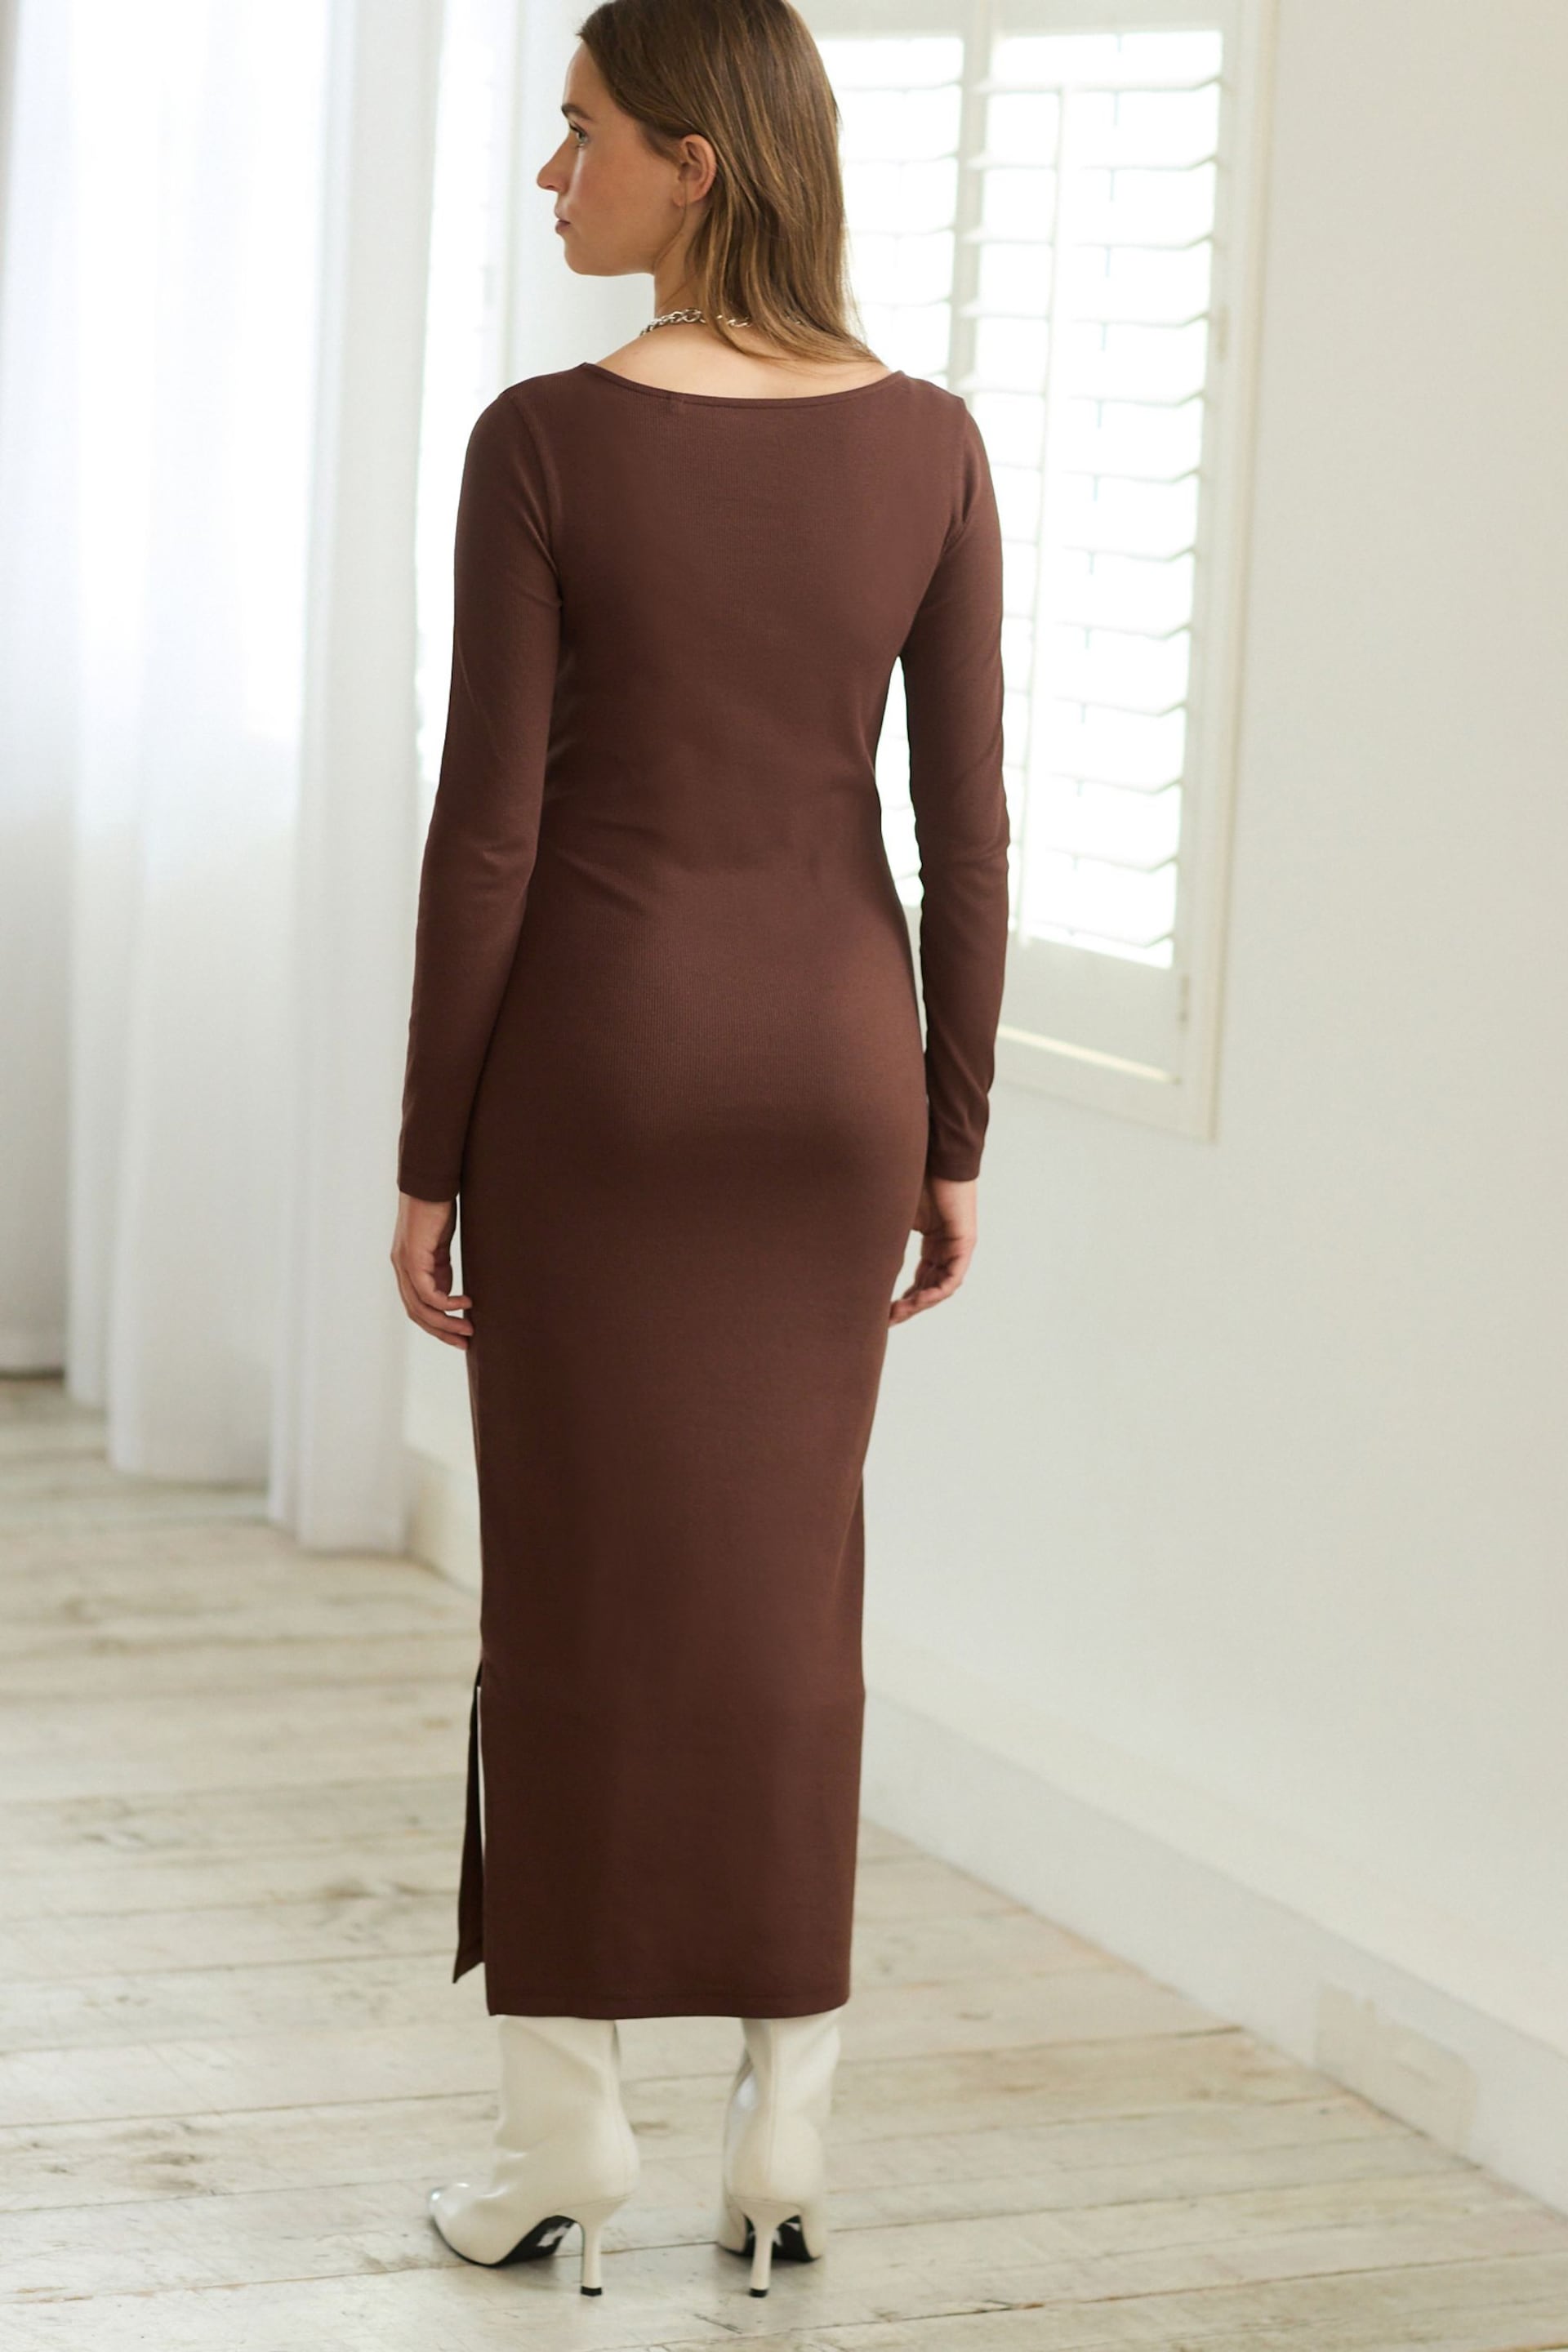 Chocolate Brown Scoop Neck Long Sleeve Ribbed Midaxi Dress - Image 3 of 6